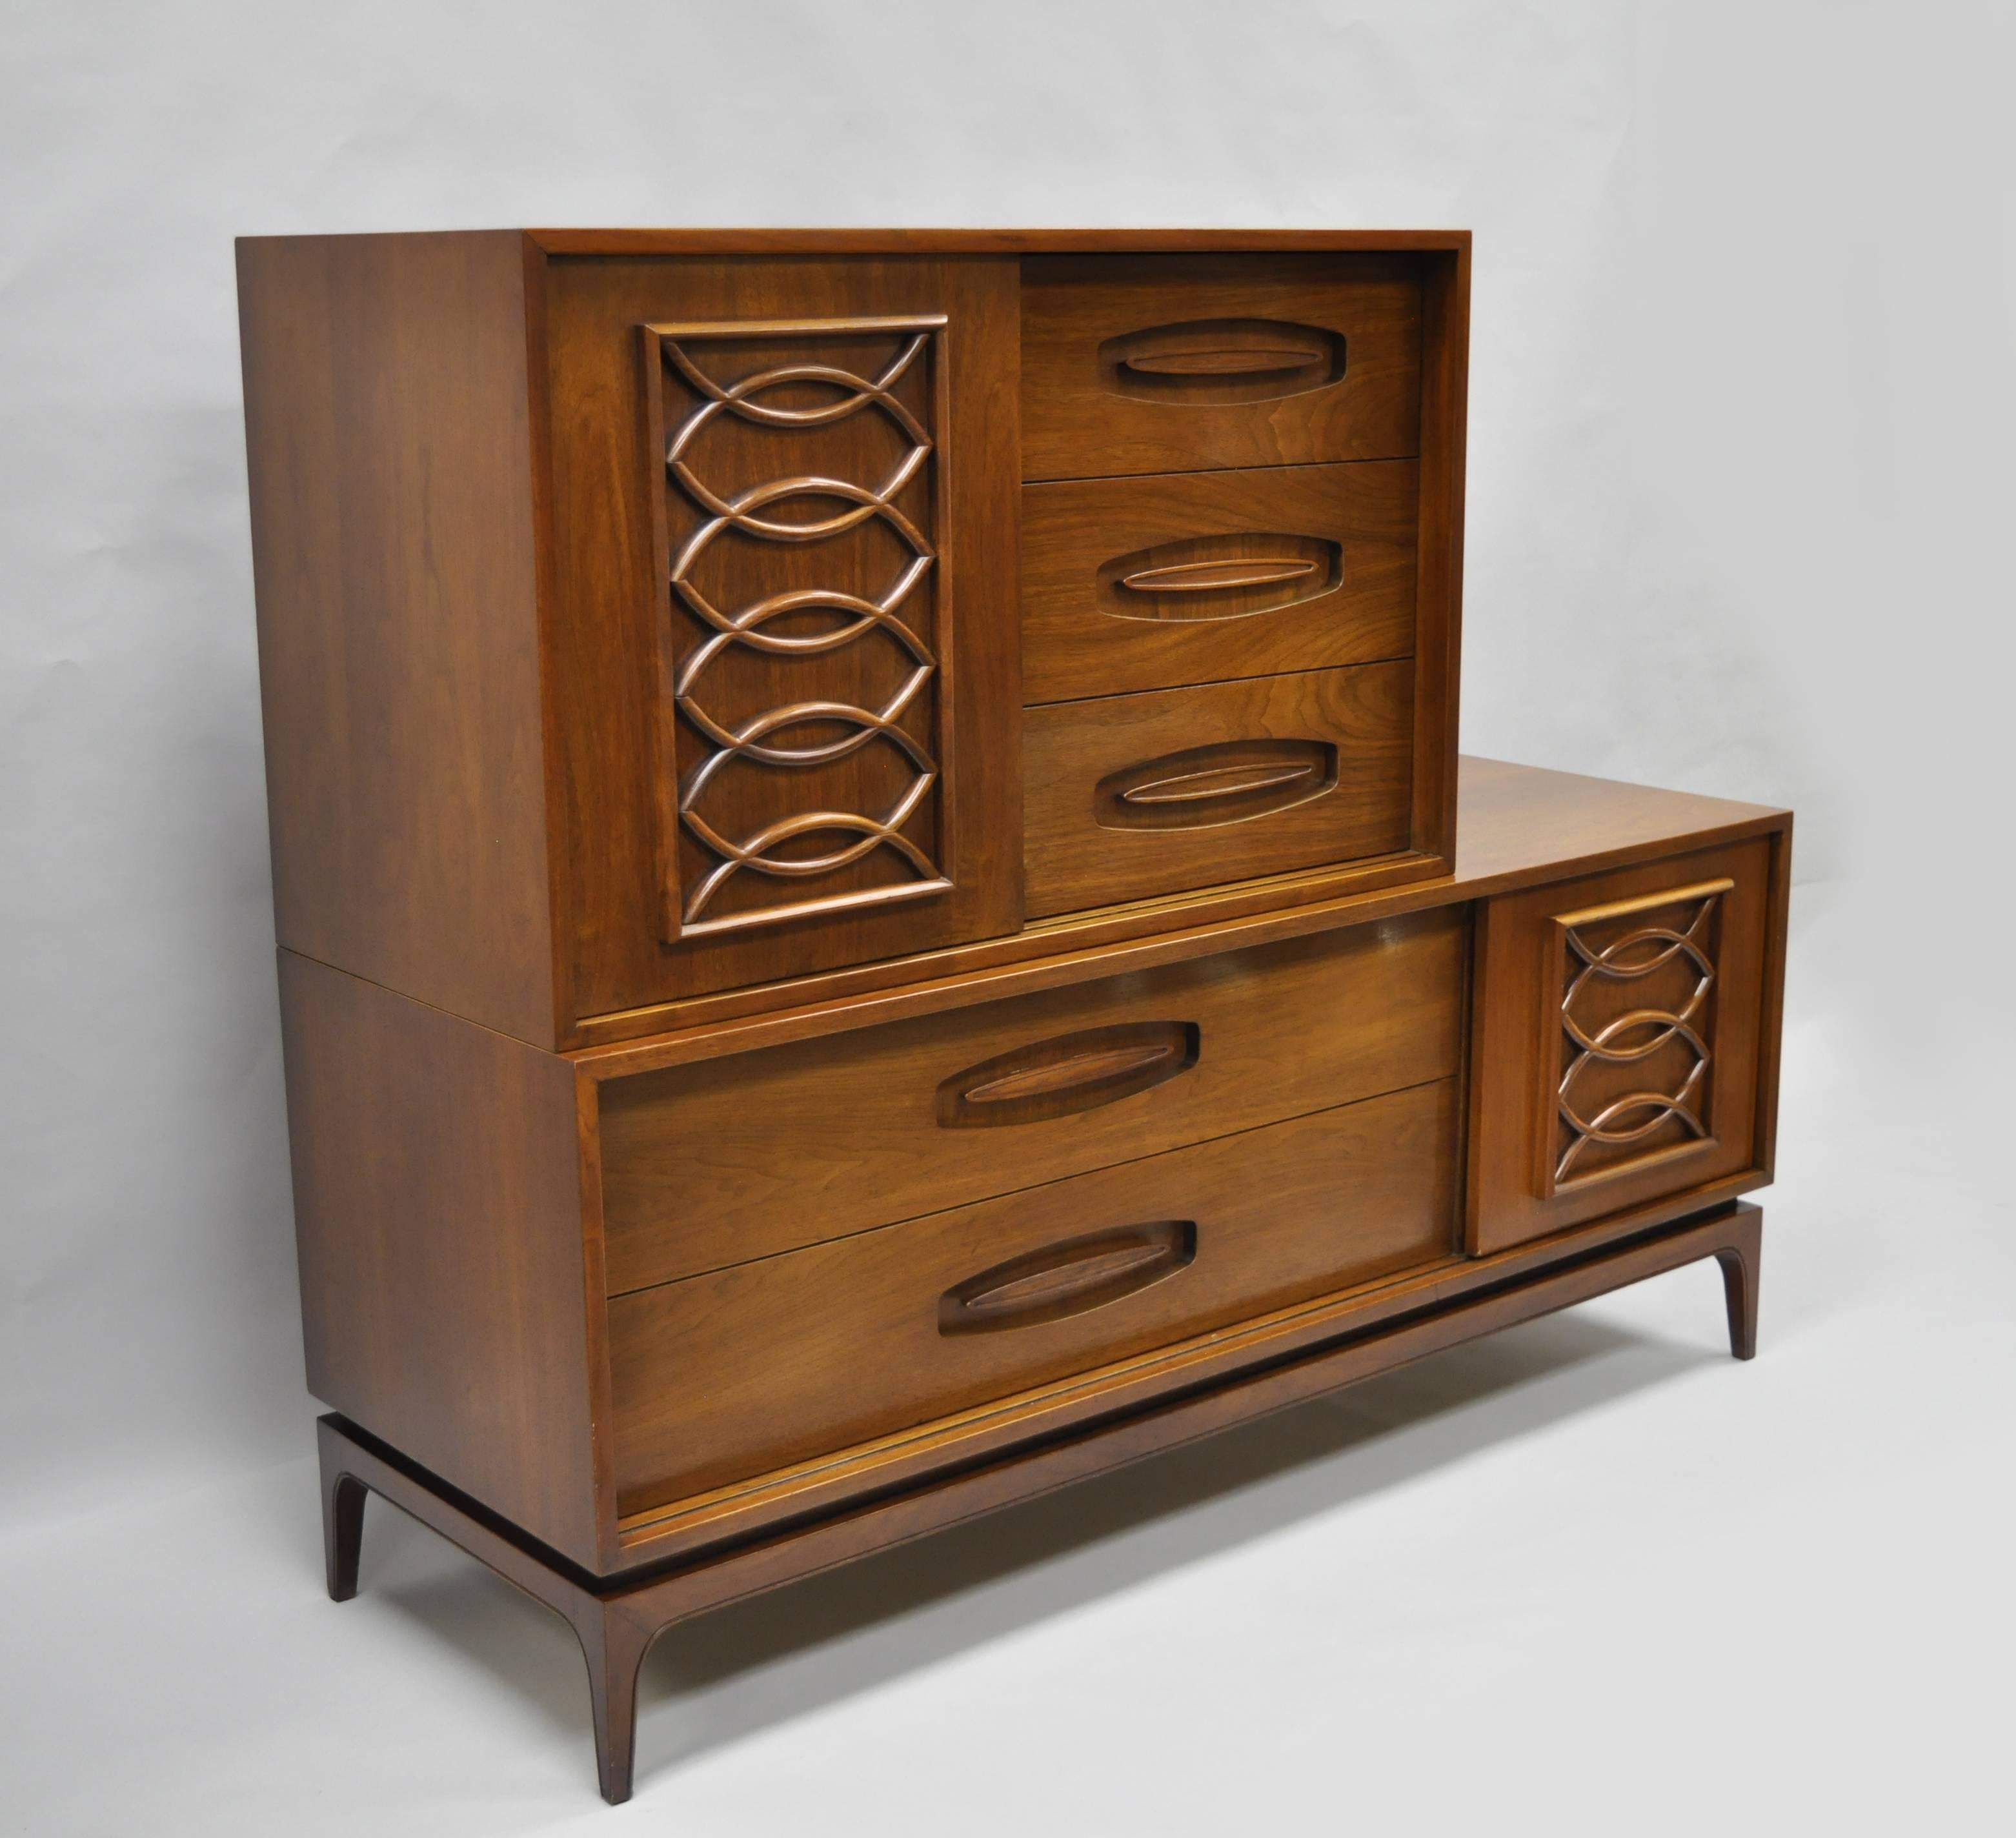 Vintage Mid-Century Modern walnut two-piece sliding door dresser chest by Castleton Furniture. Item features two part construction, ten drawers, sliding doors on upper and lower section with shaped wood moldings, tapered legs, sculpted wood inset